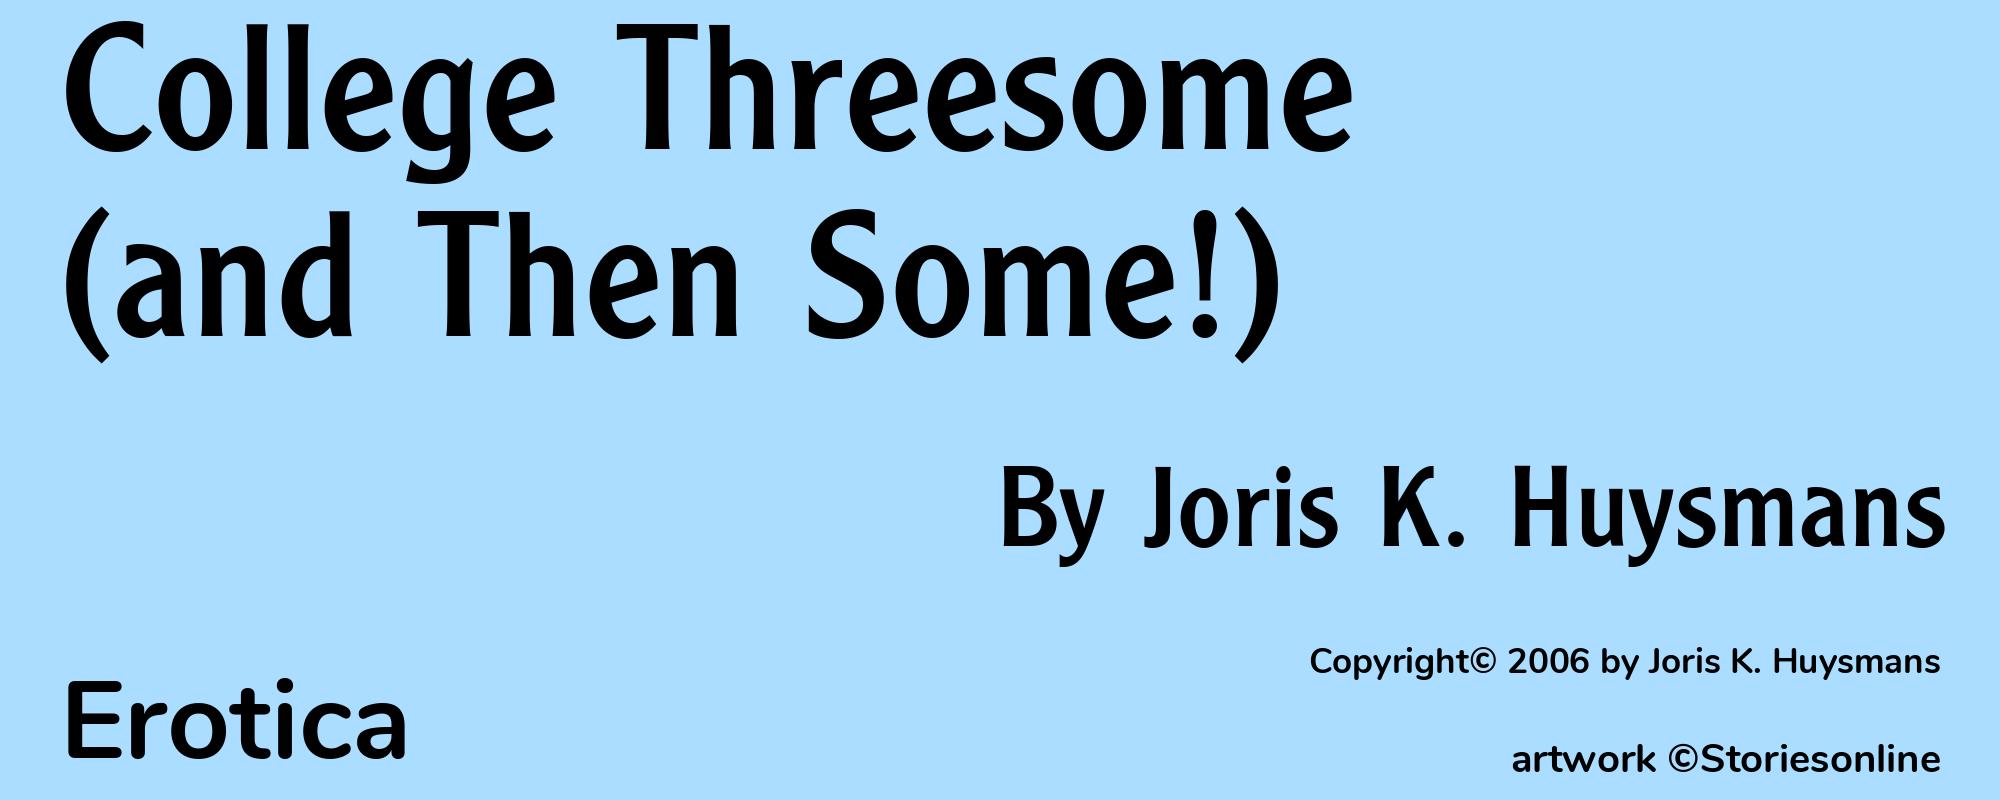 College Threesome (and Then Some!) - Cover